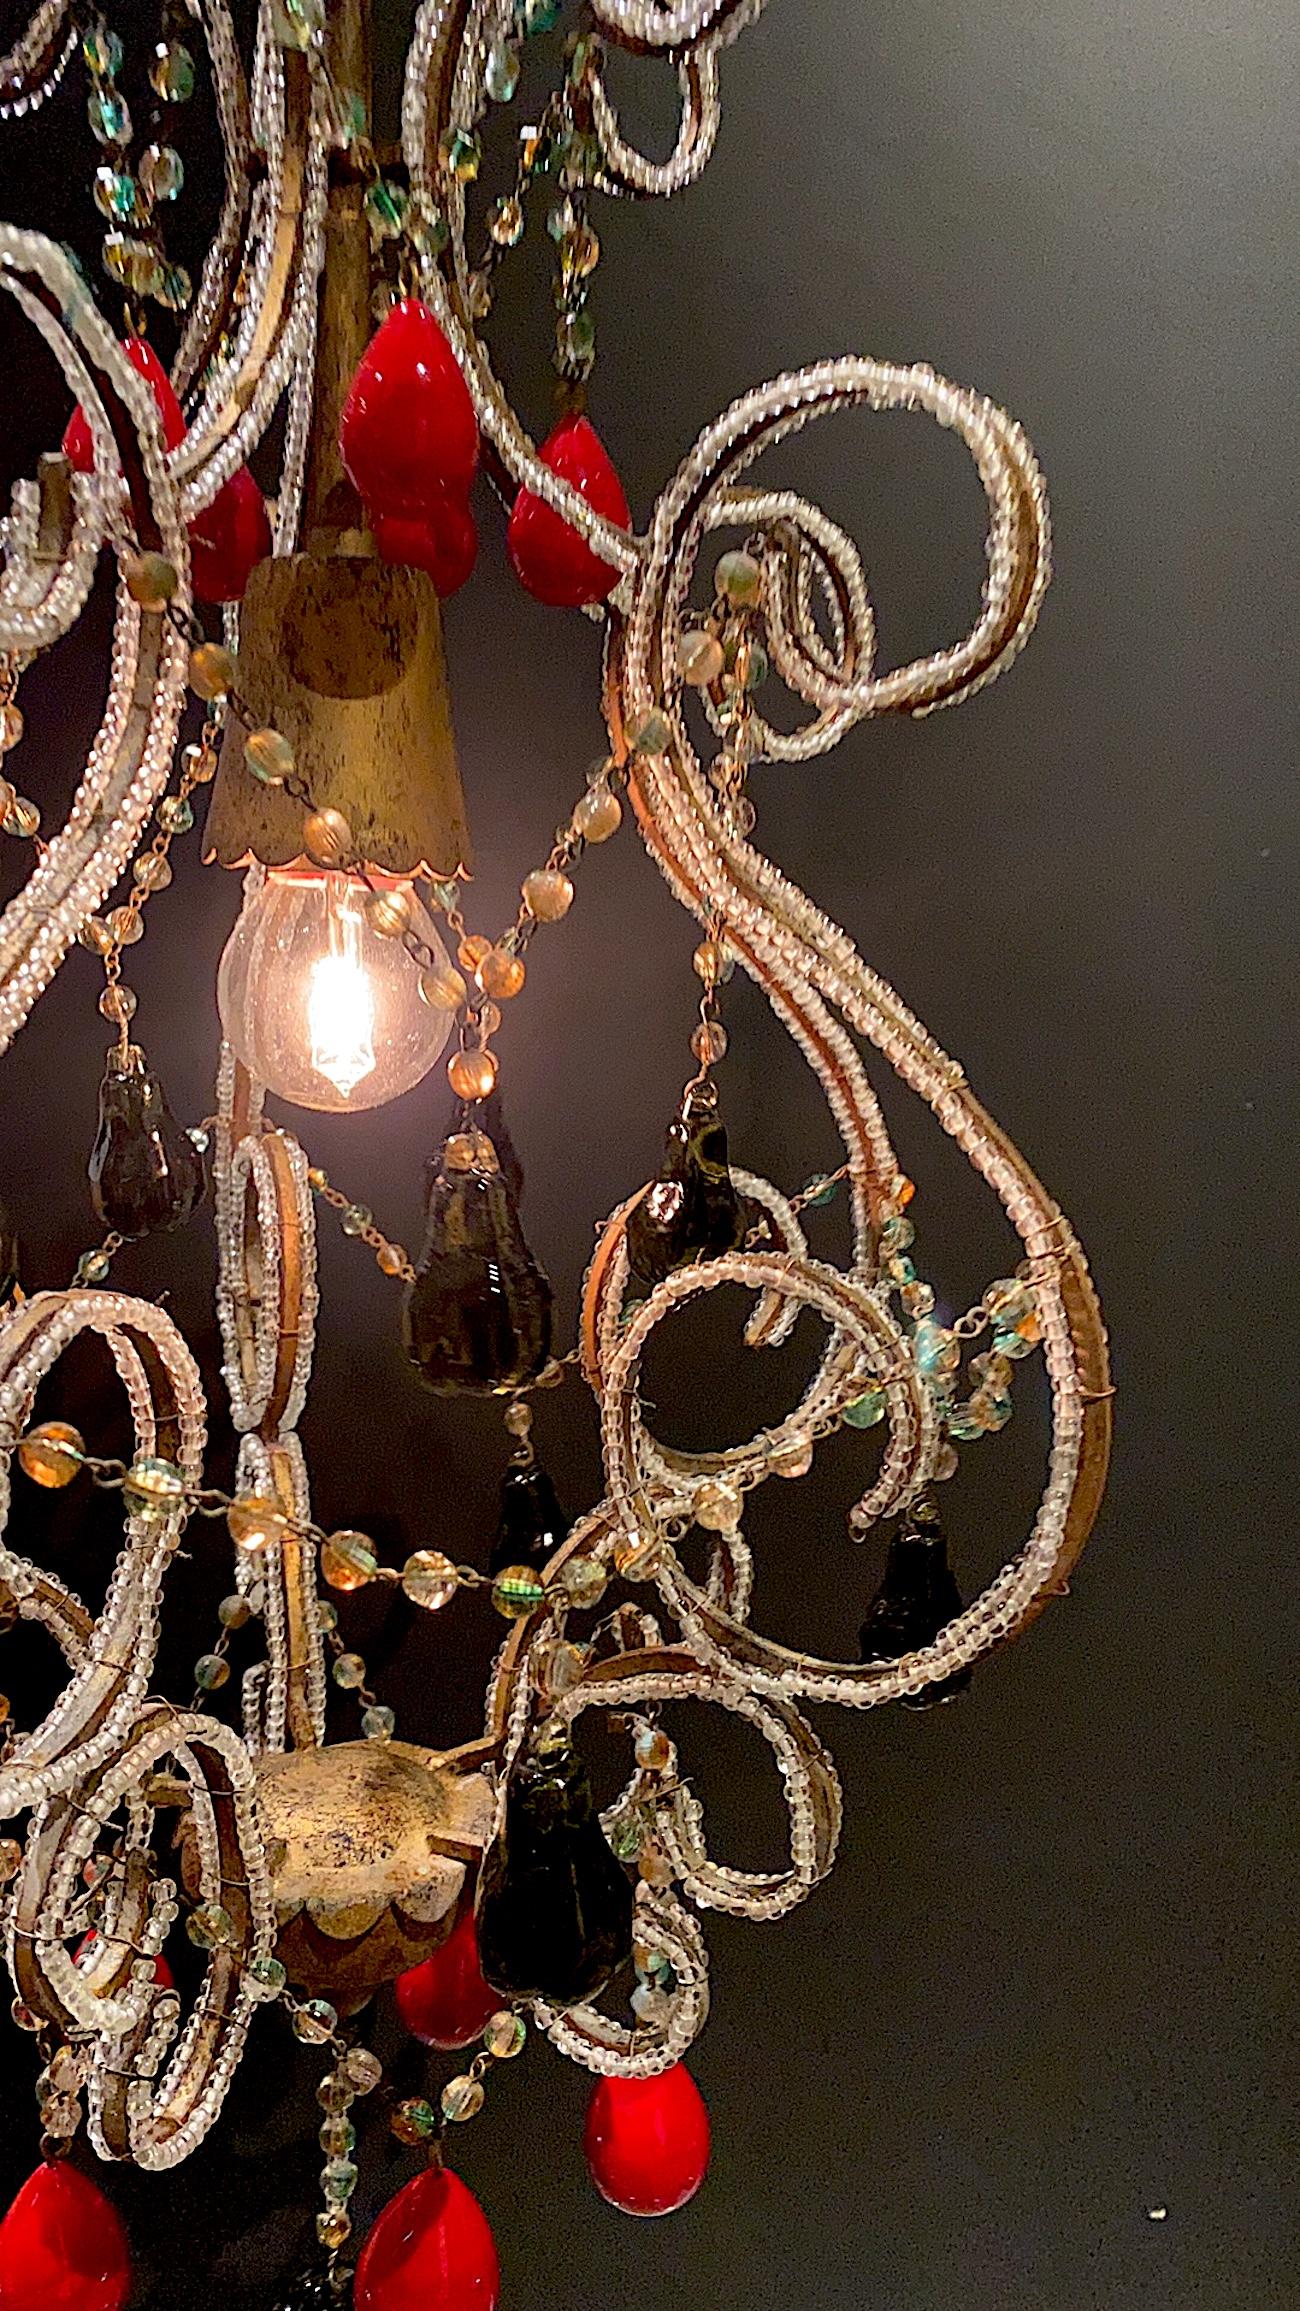 Mid-20th Century Italian 1950s Hollywood Regency Pendant Light with Venetian Fruits and Beads For Sale